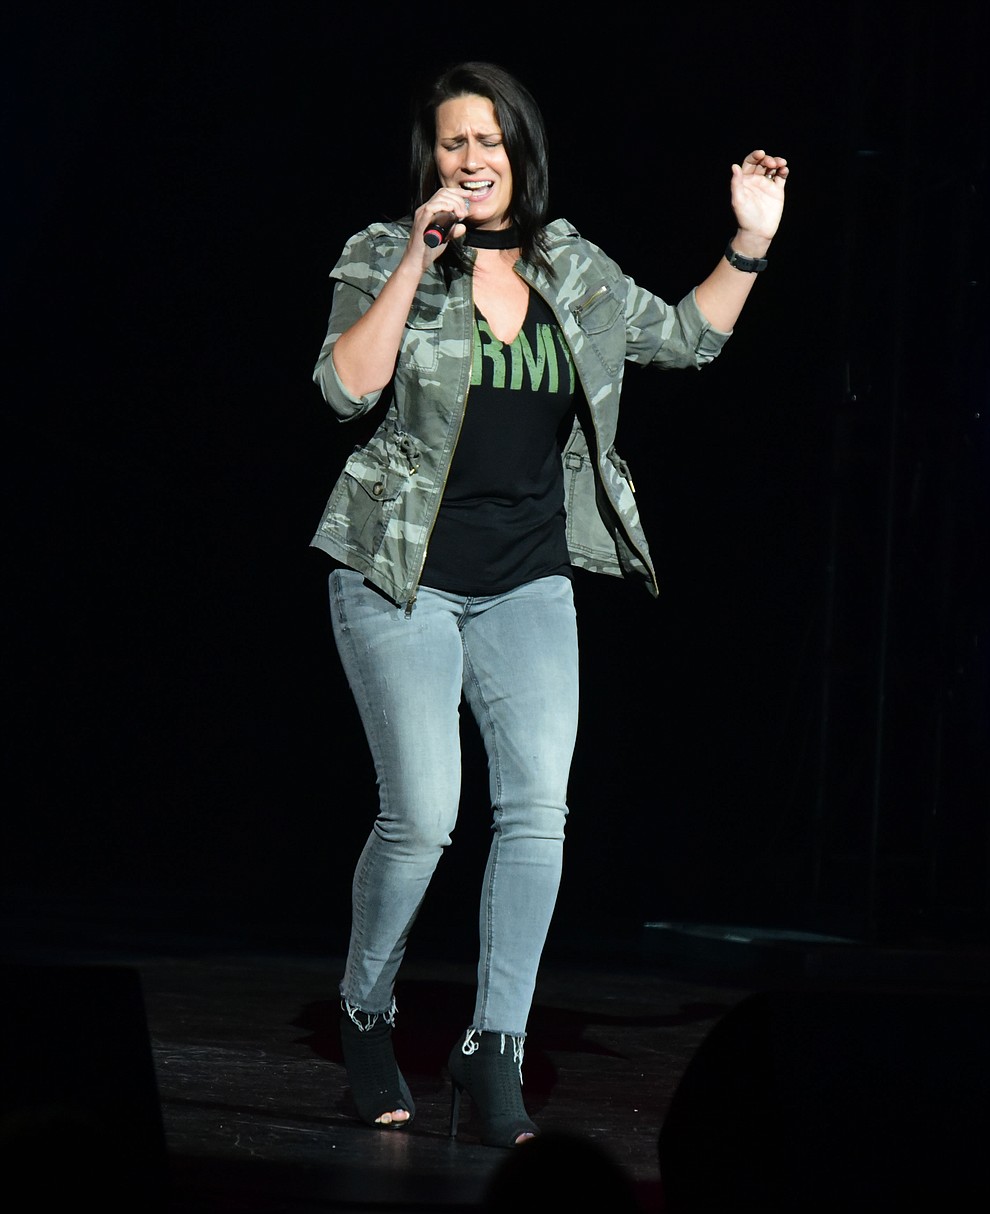 Jessica Jackson sings "Gunpowder and Lead" during the finale of the 8th annual Prescott Idol competition at the Yavapai College Performance Hall Wednesday, September 6 in Prescott . (Les Stukenberg/Courier).